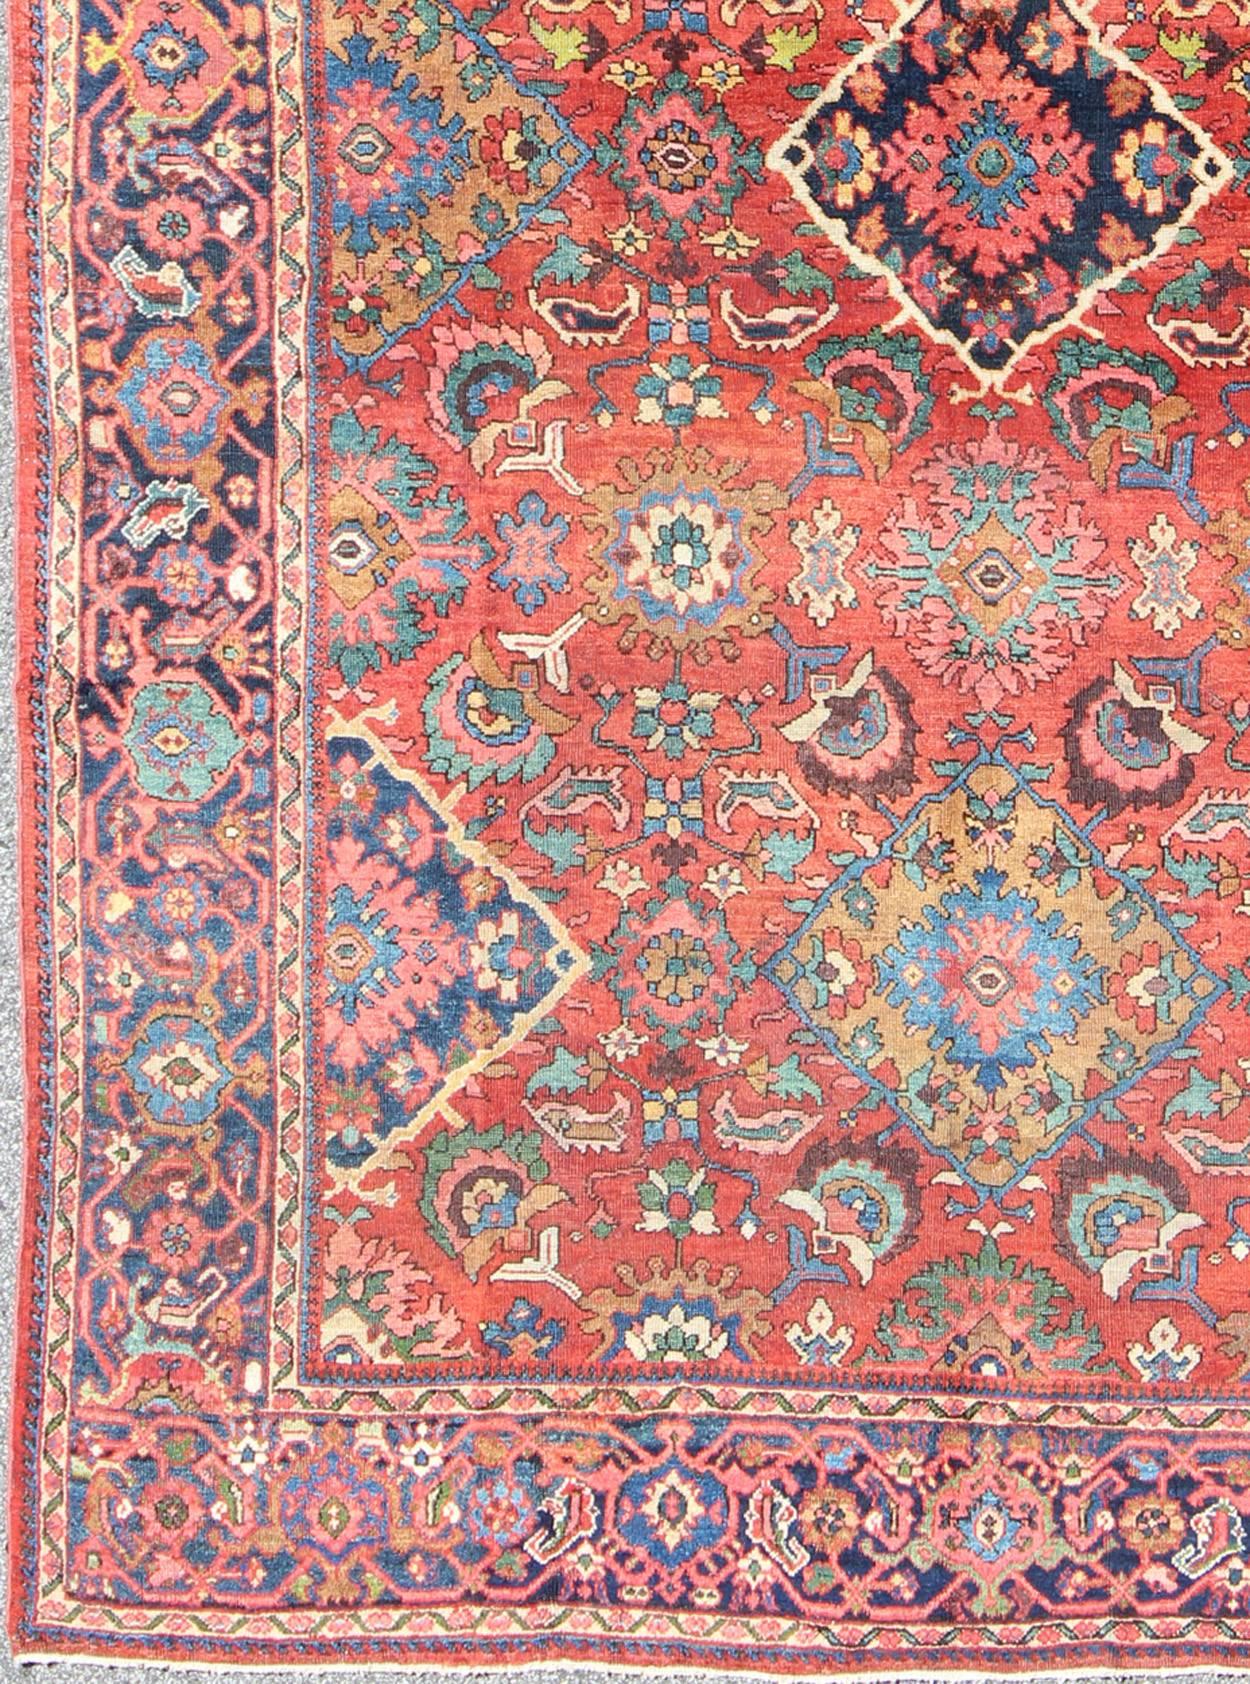 Antique Sultanabad Rug with All Over Diamond Medallions & Floral Motifs, Keivan Woven Arts/ rug/ G-0207, country of origin / type: Iran / Sultanabad, circa 1910

Measures: 7'9 x 11'4.

Sultanabad rugs are renown for their elegance and delicate